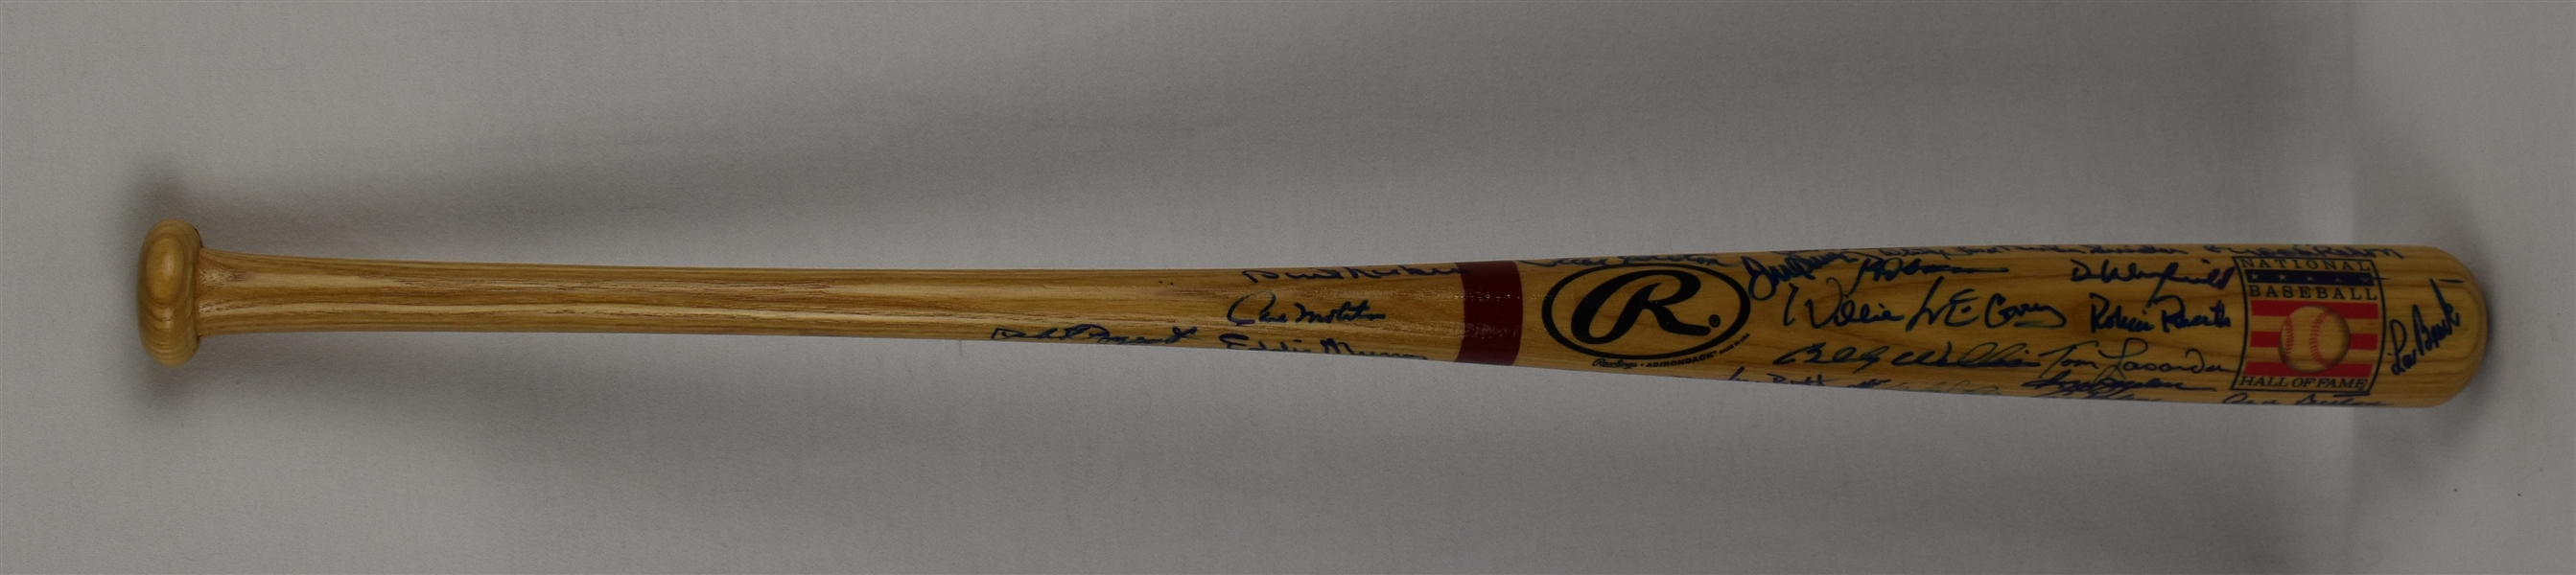 Hall of Fame Autographed Baseball Bat w/51 Signatures Including Kirby Puckett & Sandy Koufax w/Puckett Family Provenance